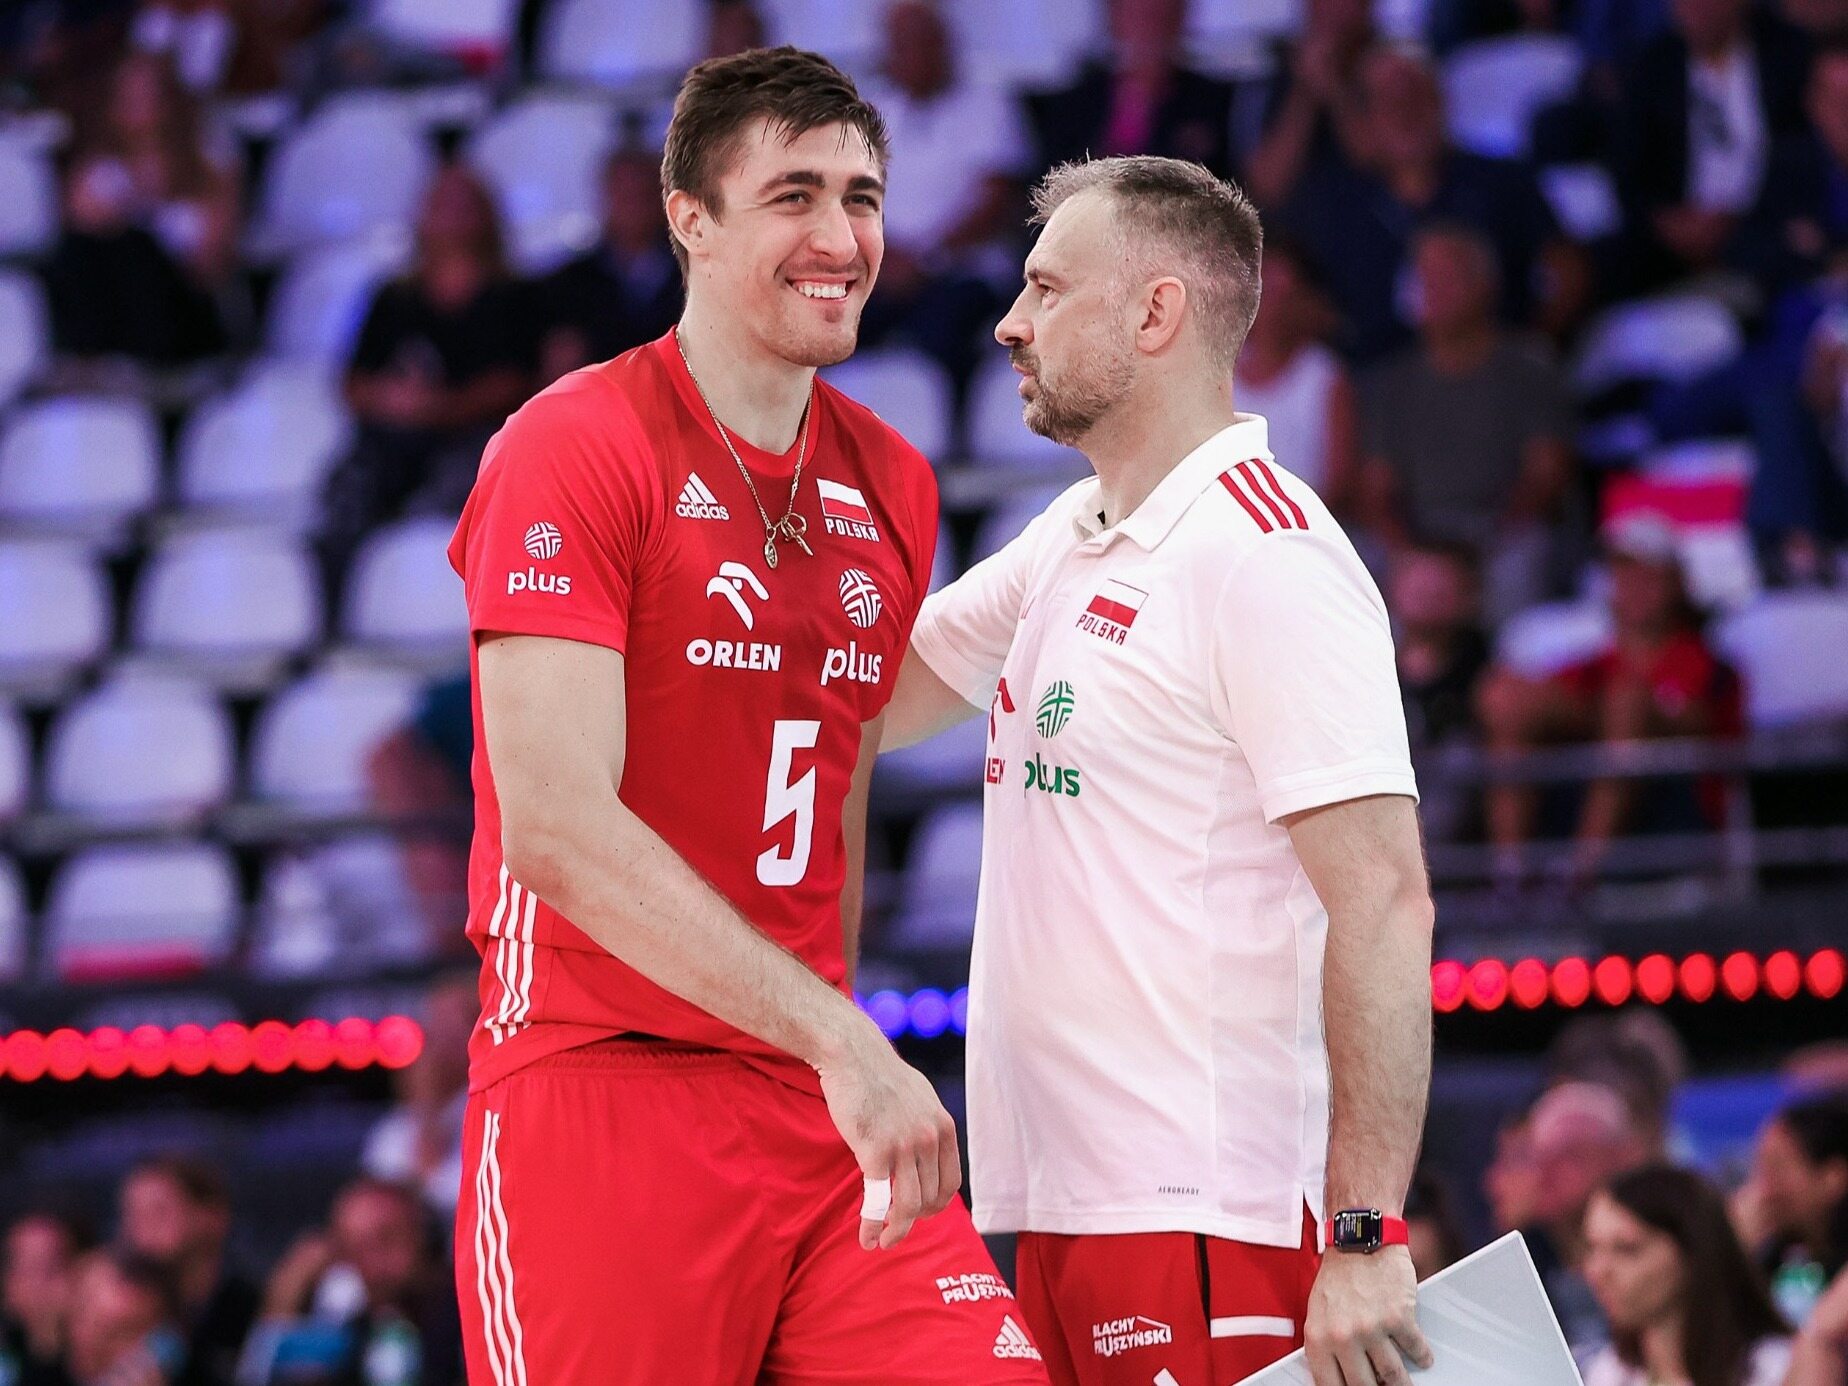 Nikola Grbic with tears in his eyes after the success.  The Serb revealed the reasons for his unexpected reaction